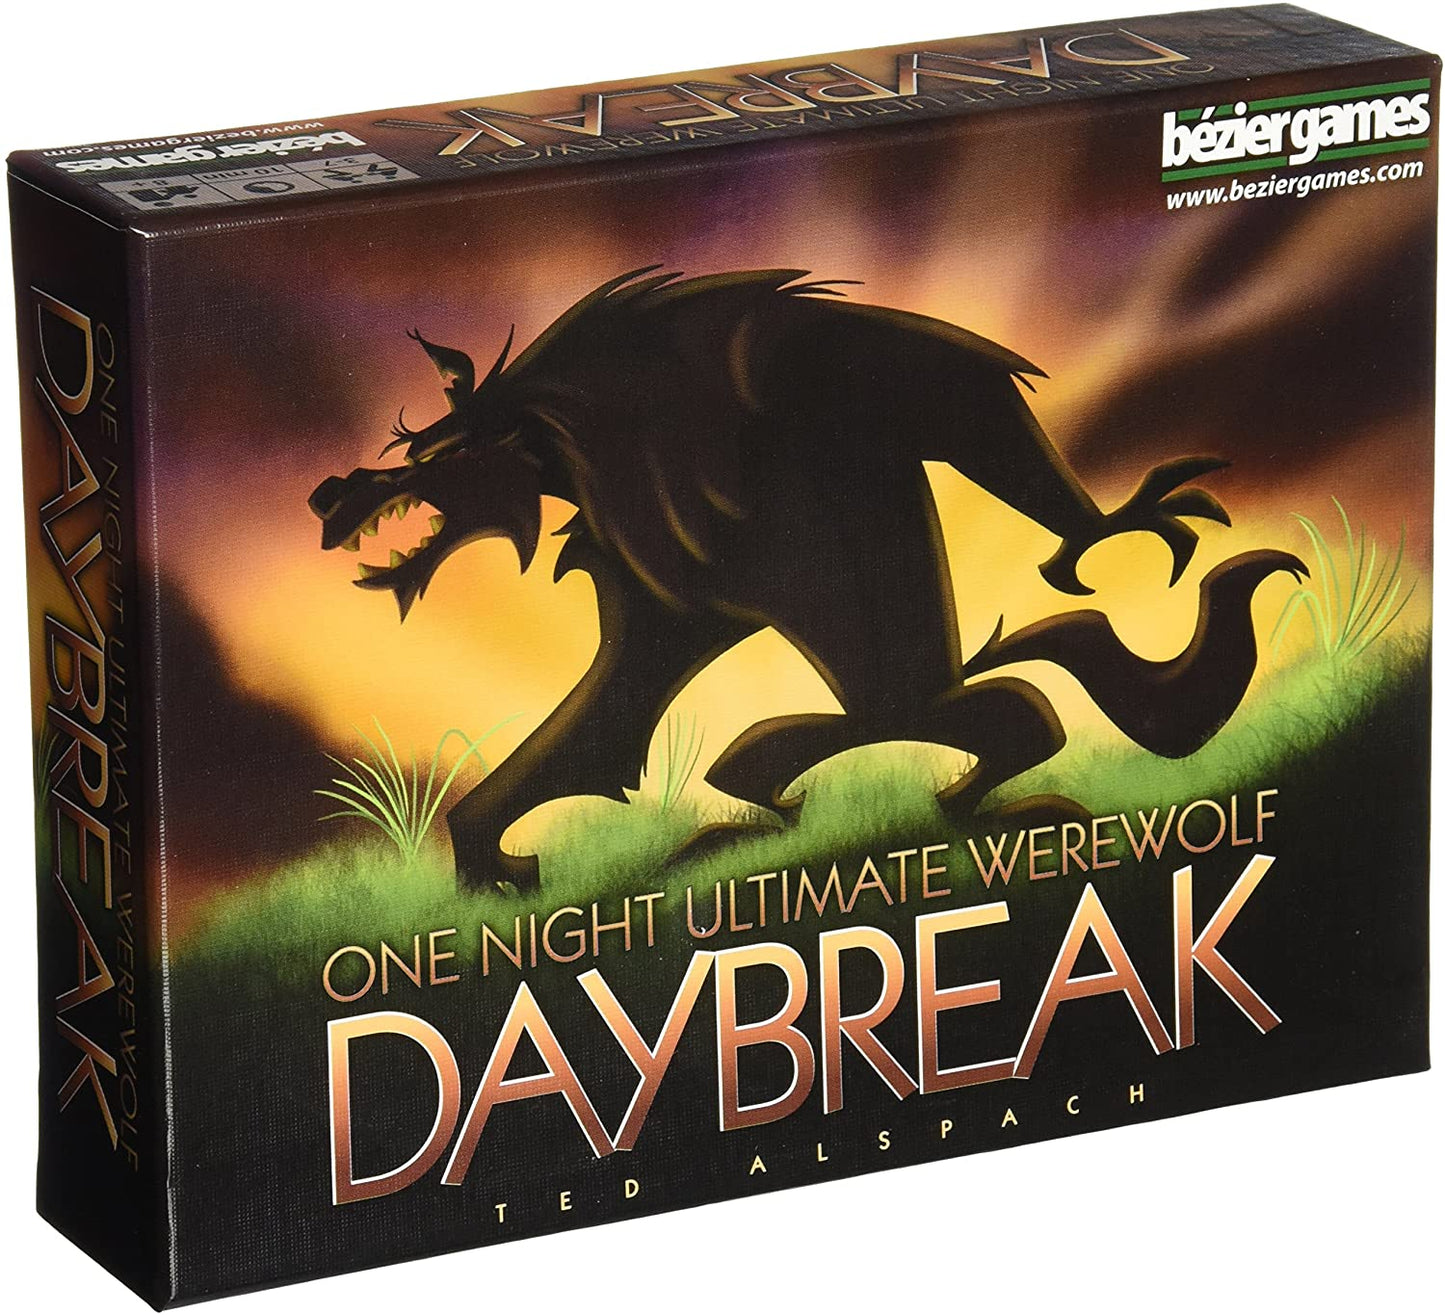 One Night: Ultimate Werewolf - Daybreak (stand alone or expansion)